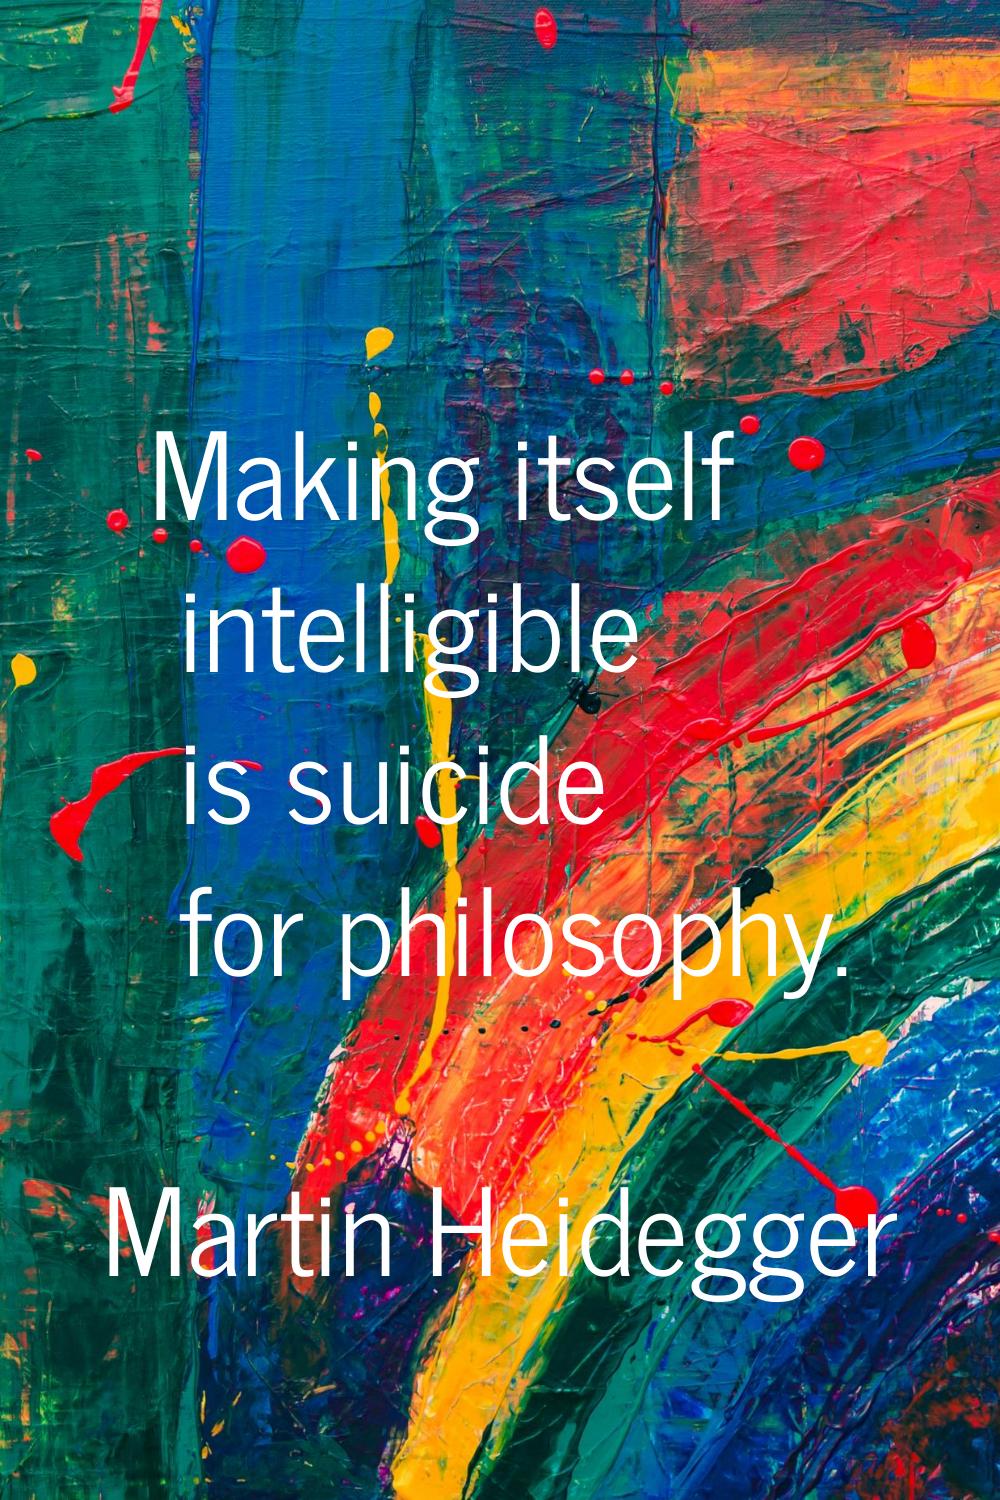 Making itself intelligible is suicide for philosophy.